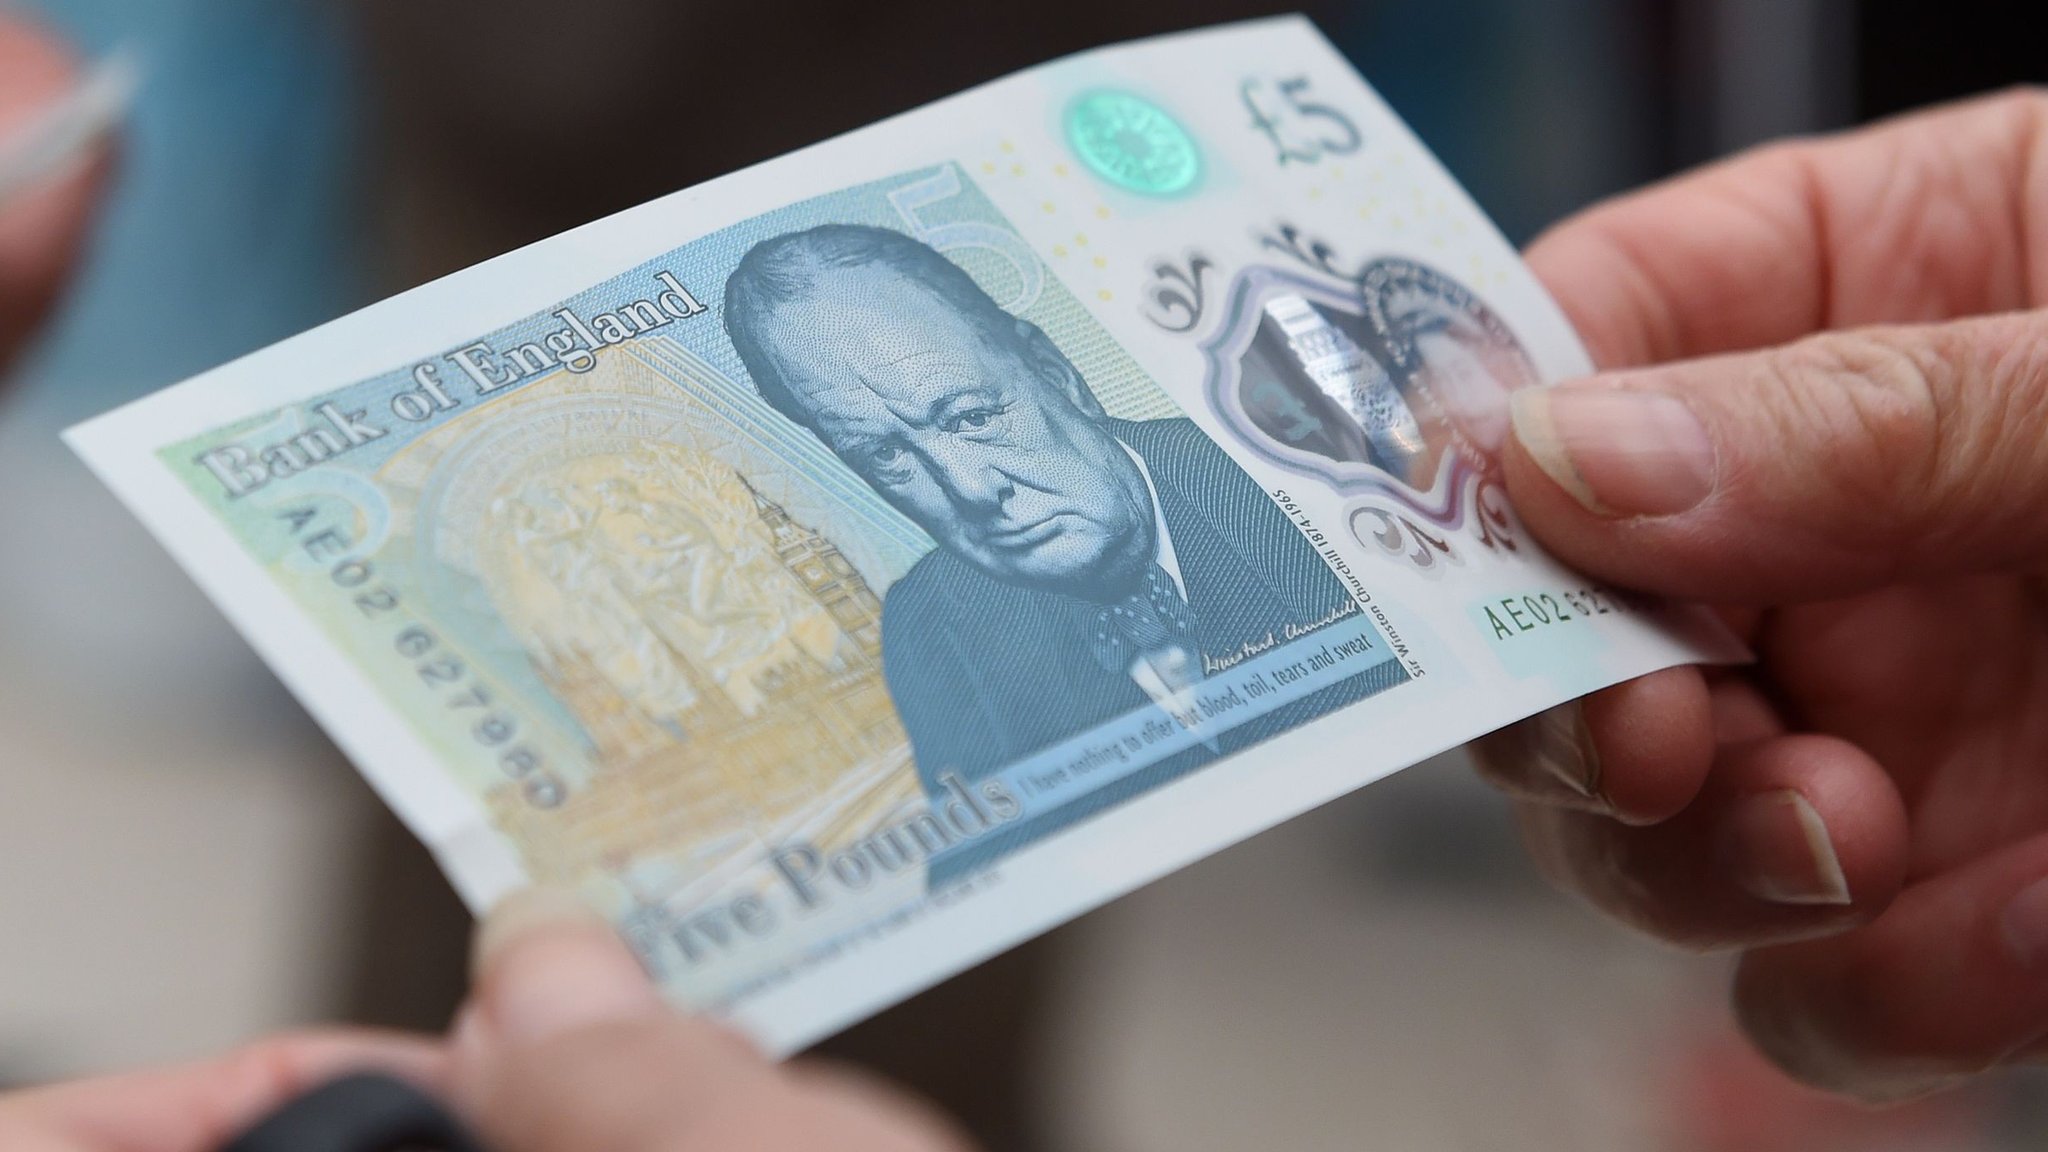 New Sir Winston Churchill £5 note design is unveiled - BBC News